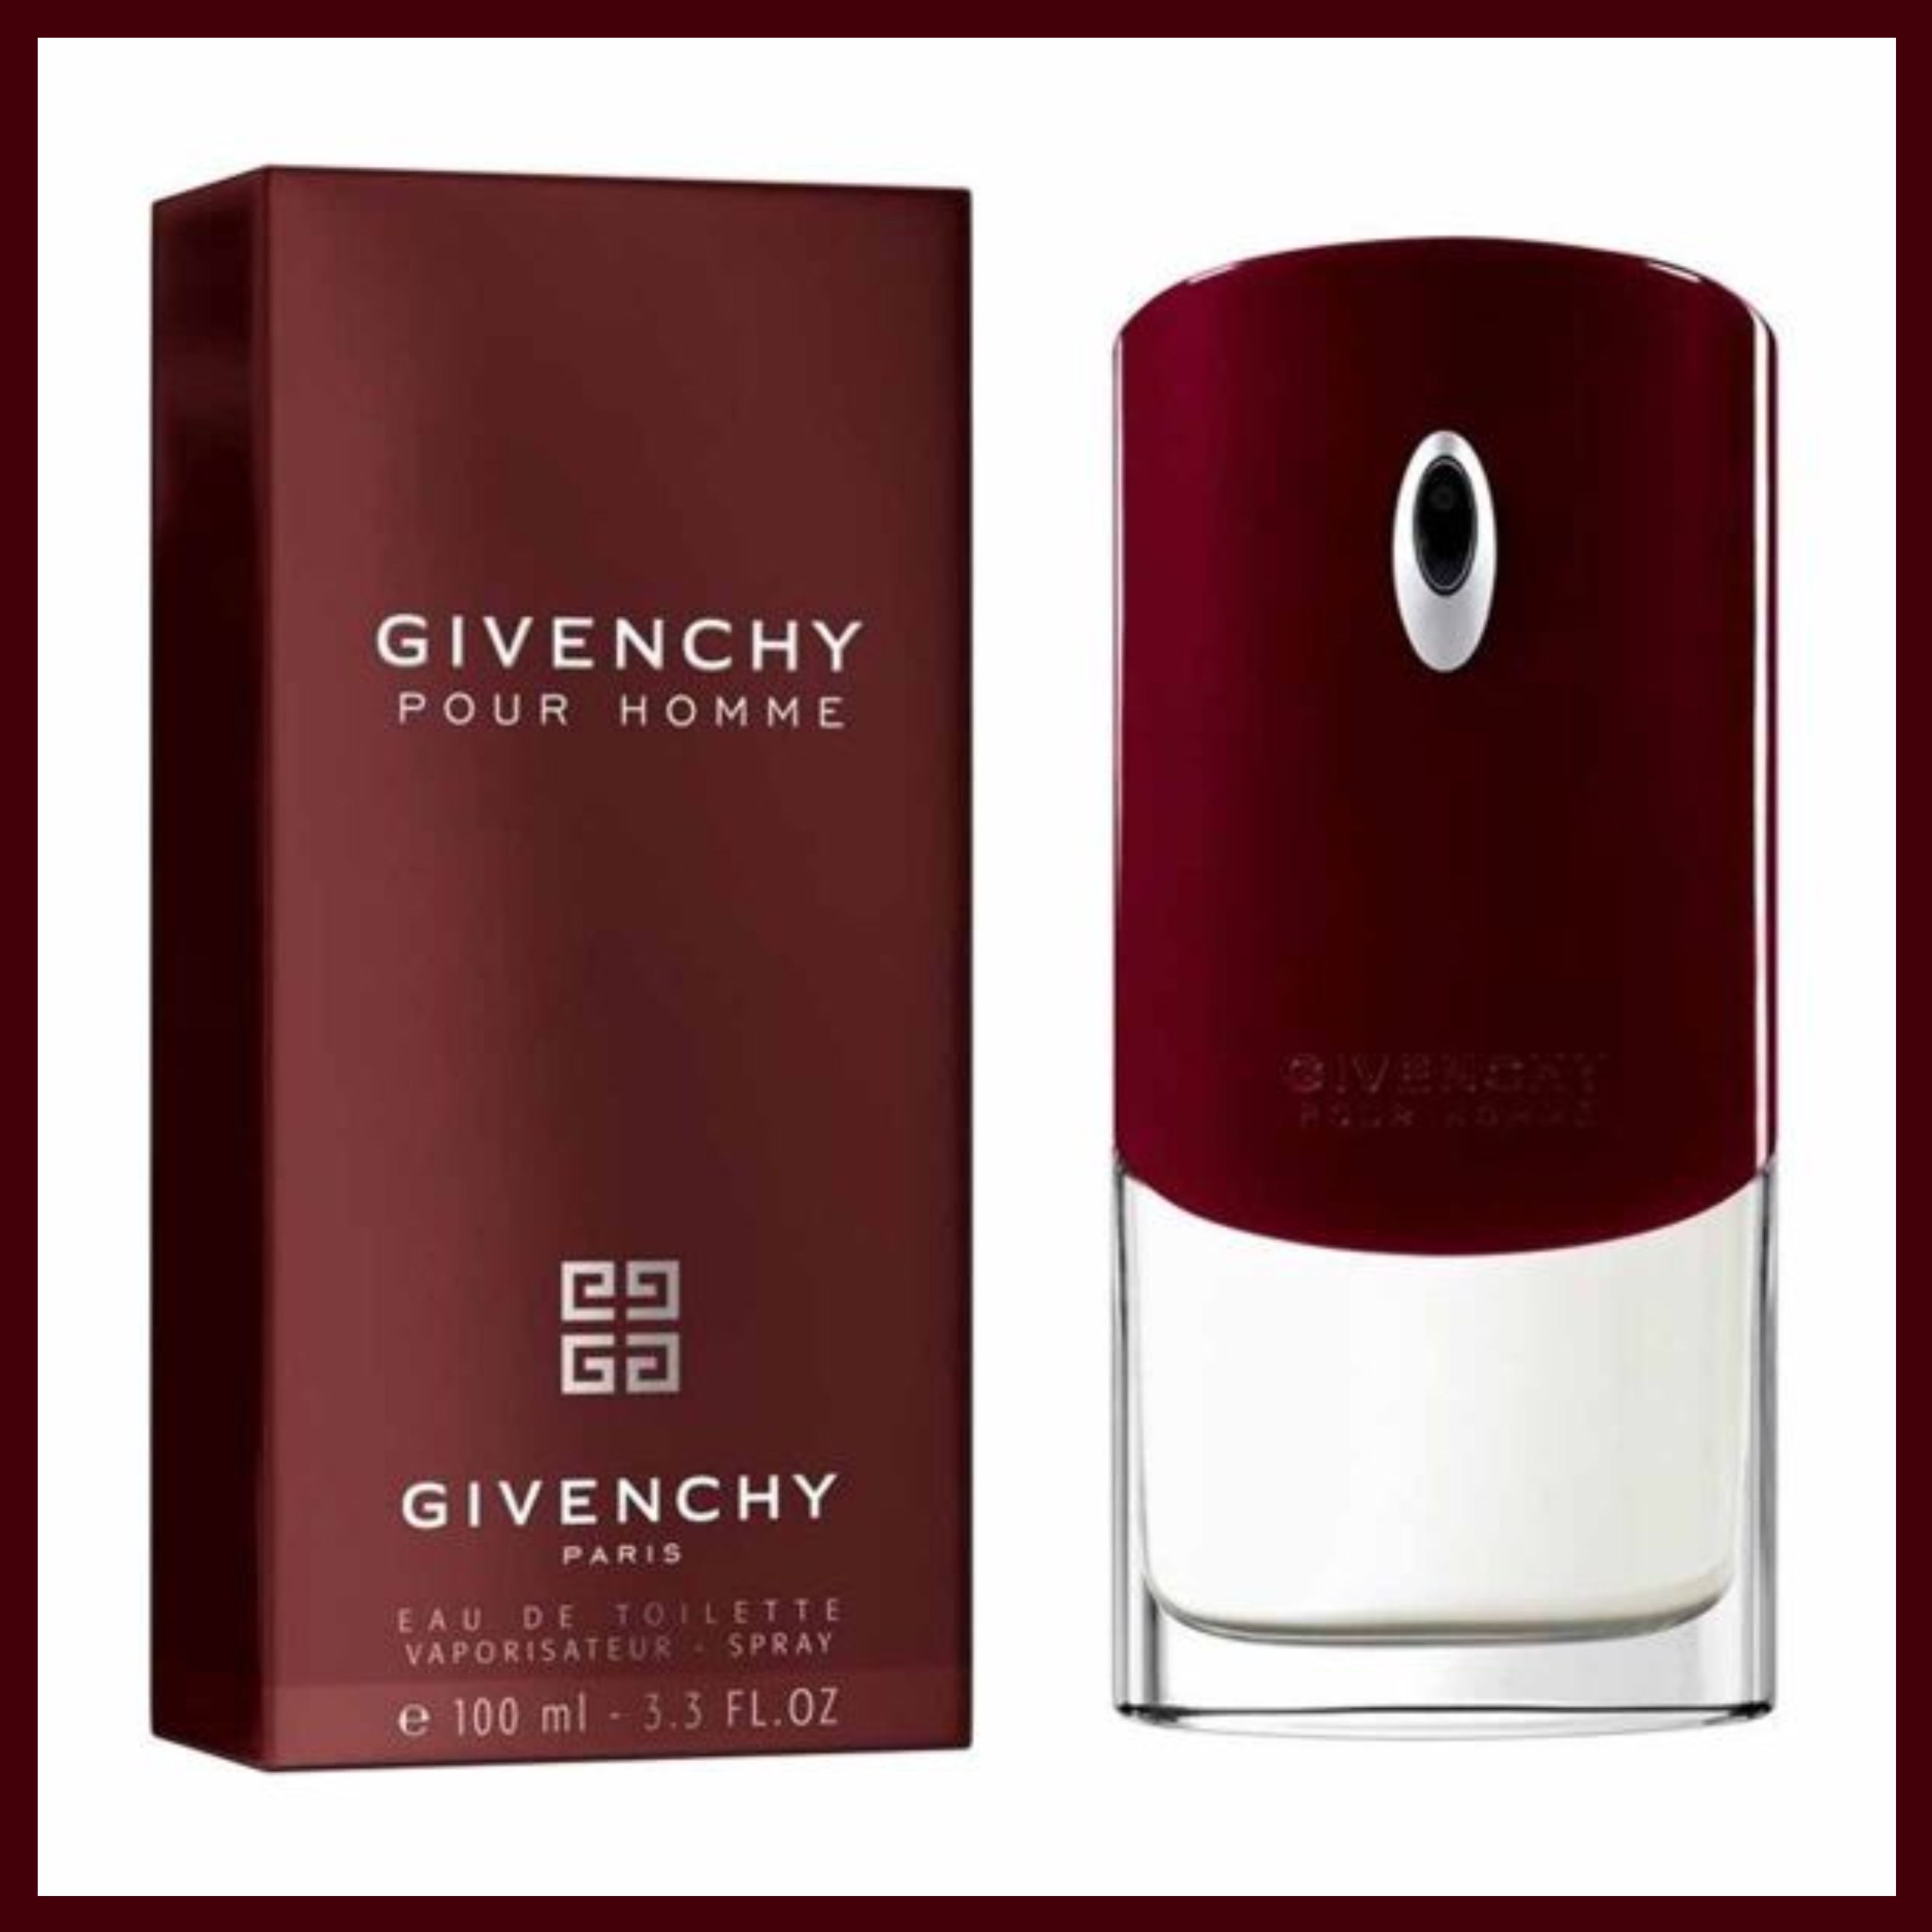 Pour homme для мужчин. Givenchy "pour homme" EDT, 100ml. Givenchy pour homme men 100ml EDT 3274870303166. Givenchy pour homme Givenchy. Givenchy Givenchy pour homme, 100 ml.